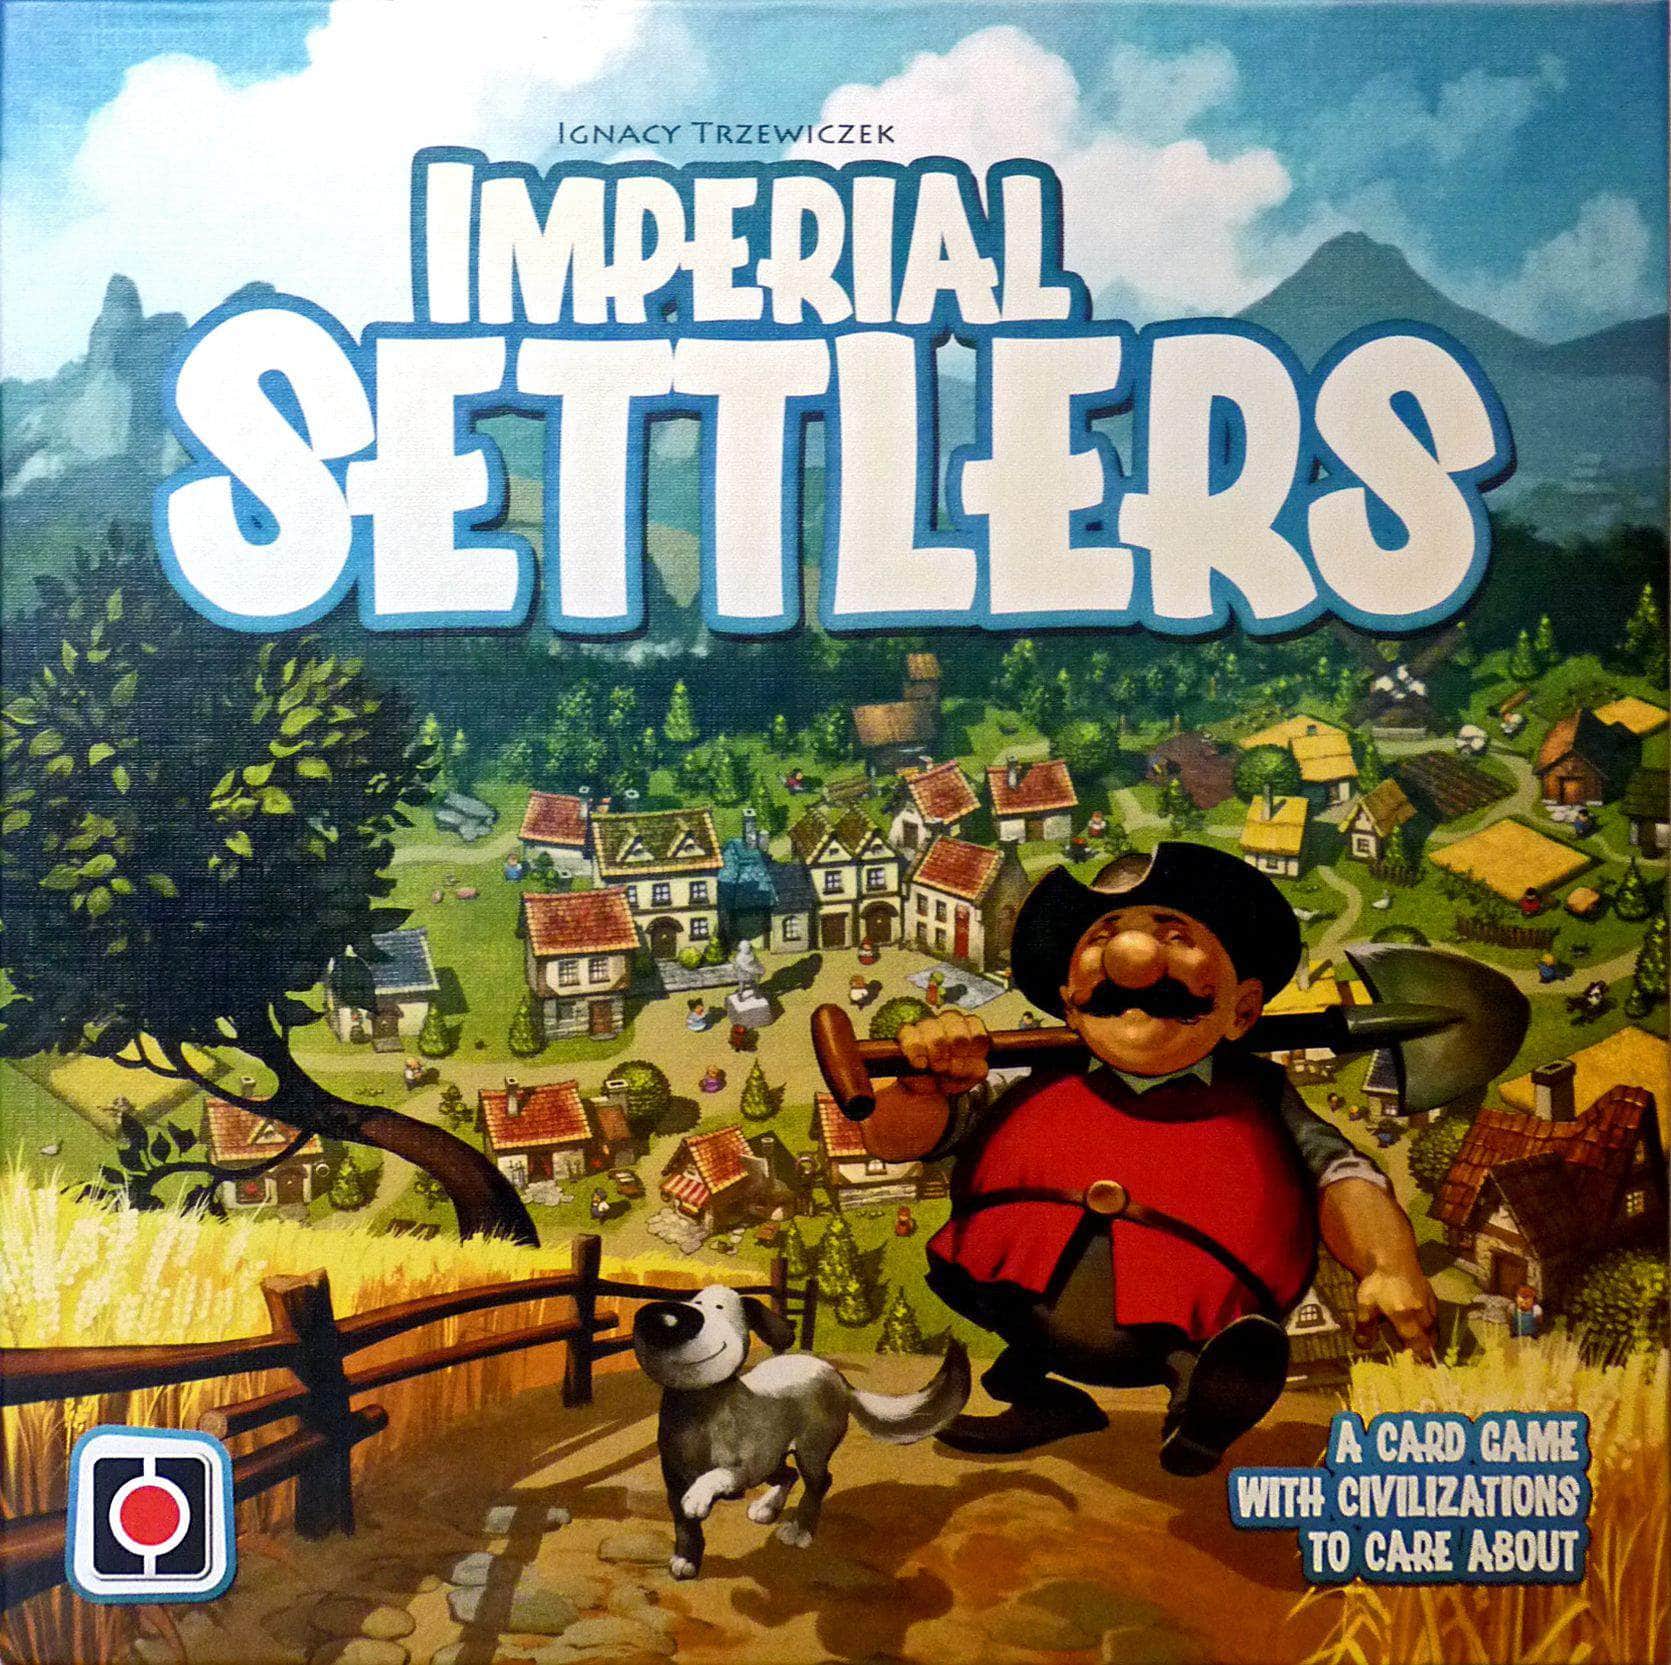 Imperial Settlers（Retail Edition）小売ボードゲーム Portal Games KS800395A